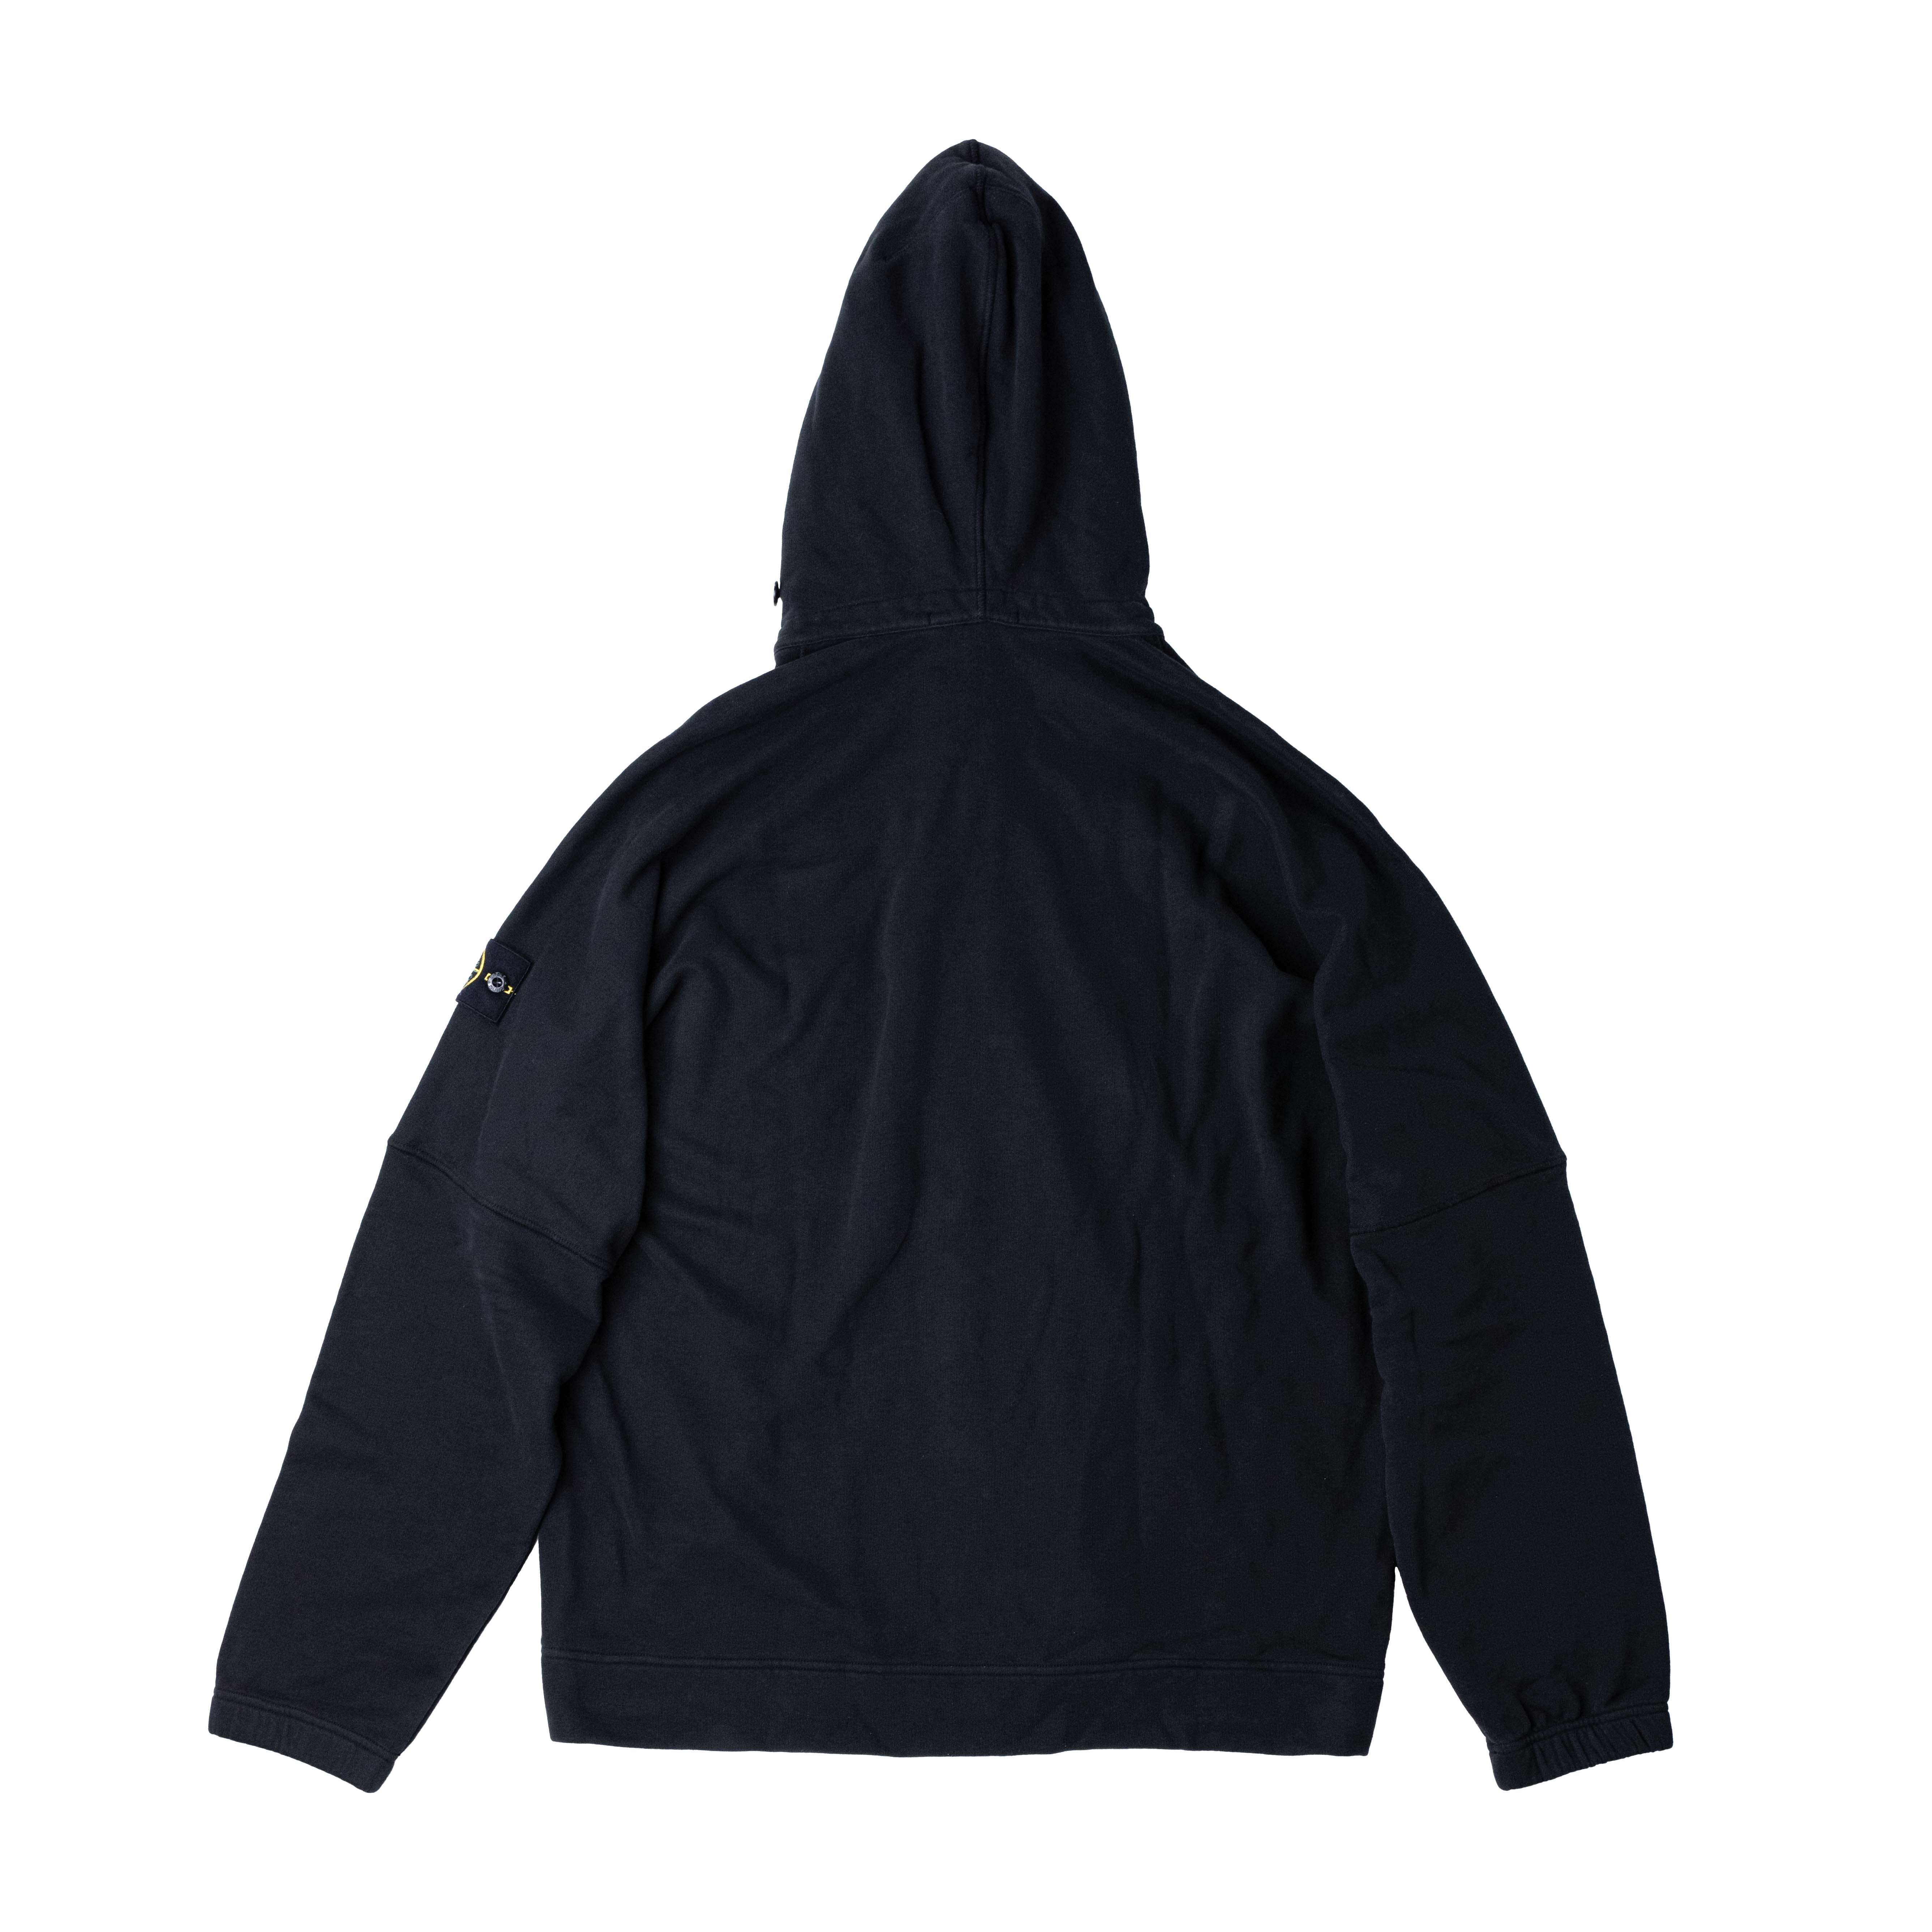 Stone Island ] 60120 Dropped-shoulder cotton zip-up hoodie jacket